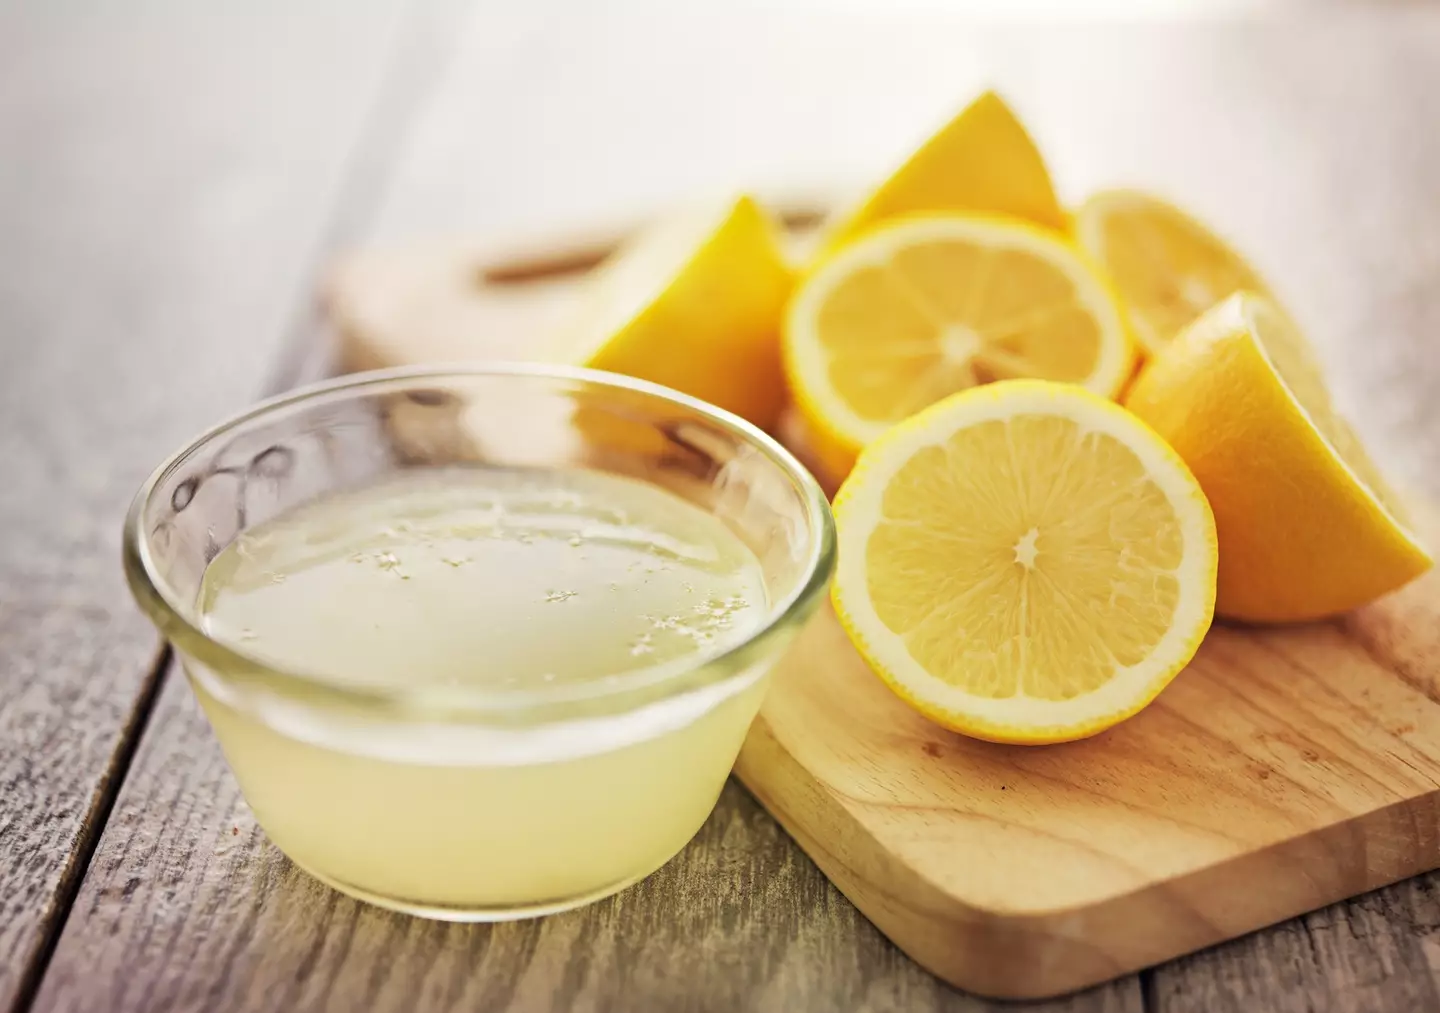 Lemon juice can help your microwave become squeaky clean.